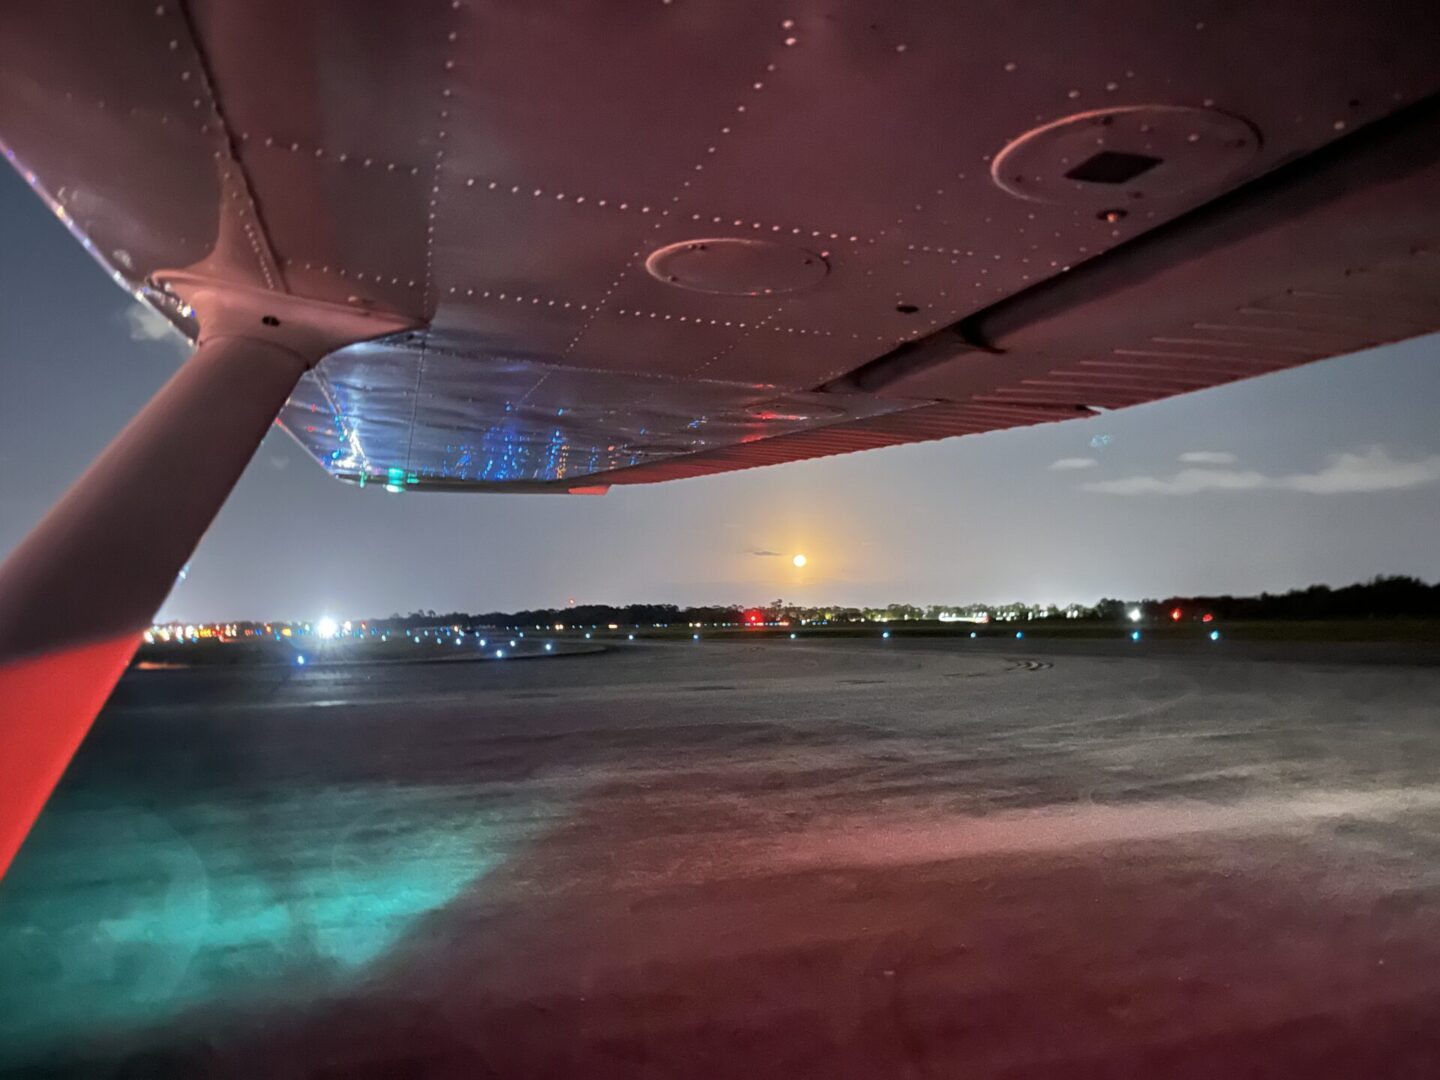 Wing of small airplane at night